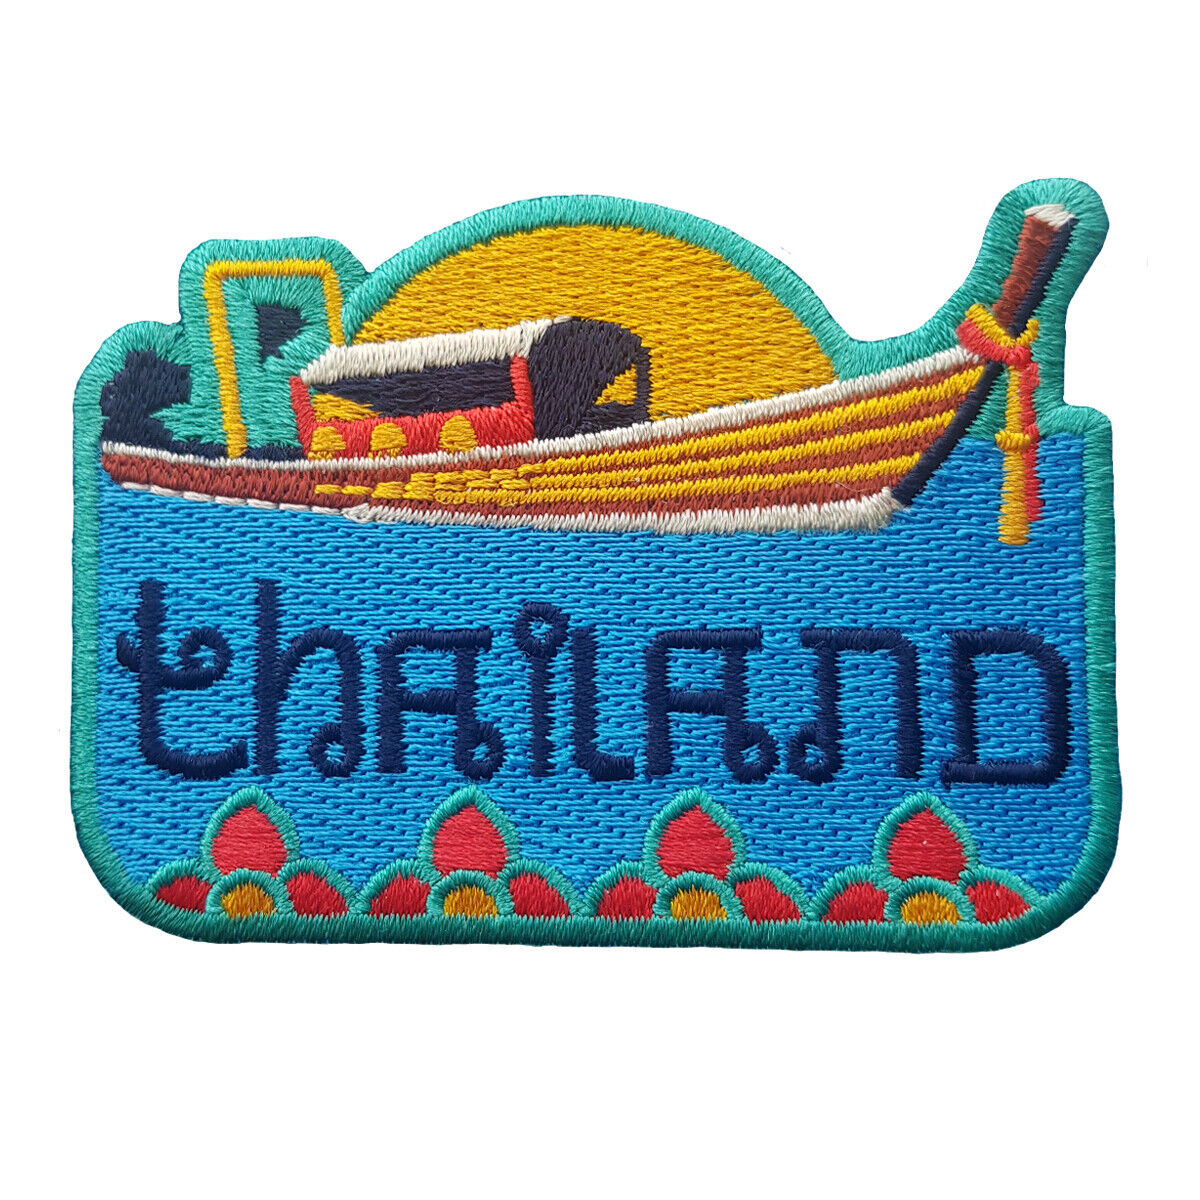 Thailand Travel Patch Embroidered Iron on Sew on Souvenir Applique